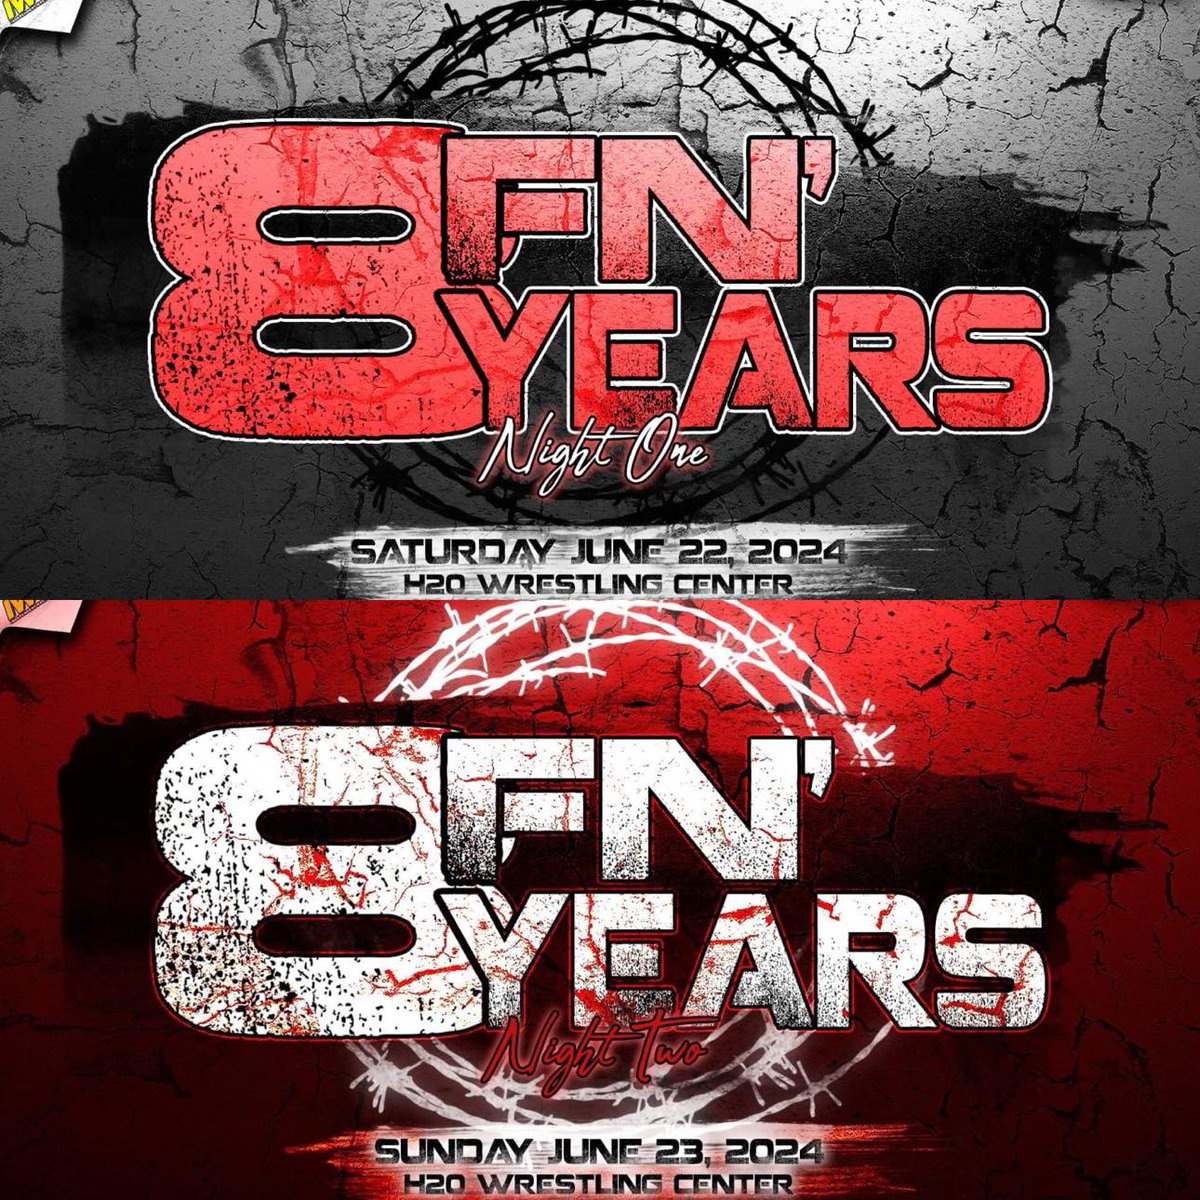 More Matches set to be announced later today for our 8 F'N Years! Anniversary Wknd 6/22 & 6/23 LIVE on @indiewrestling